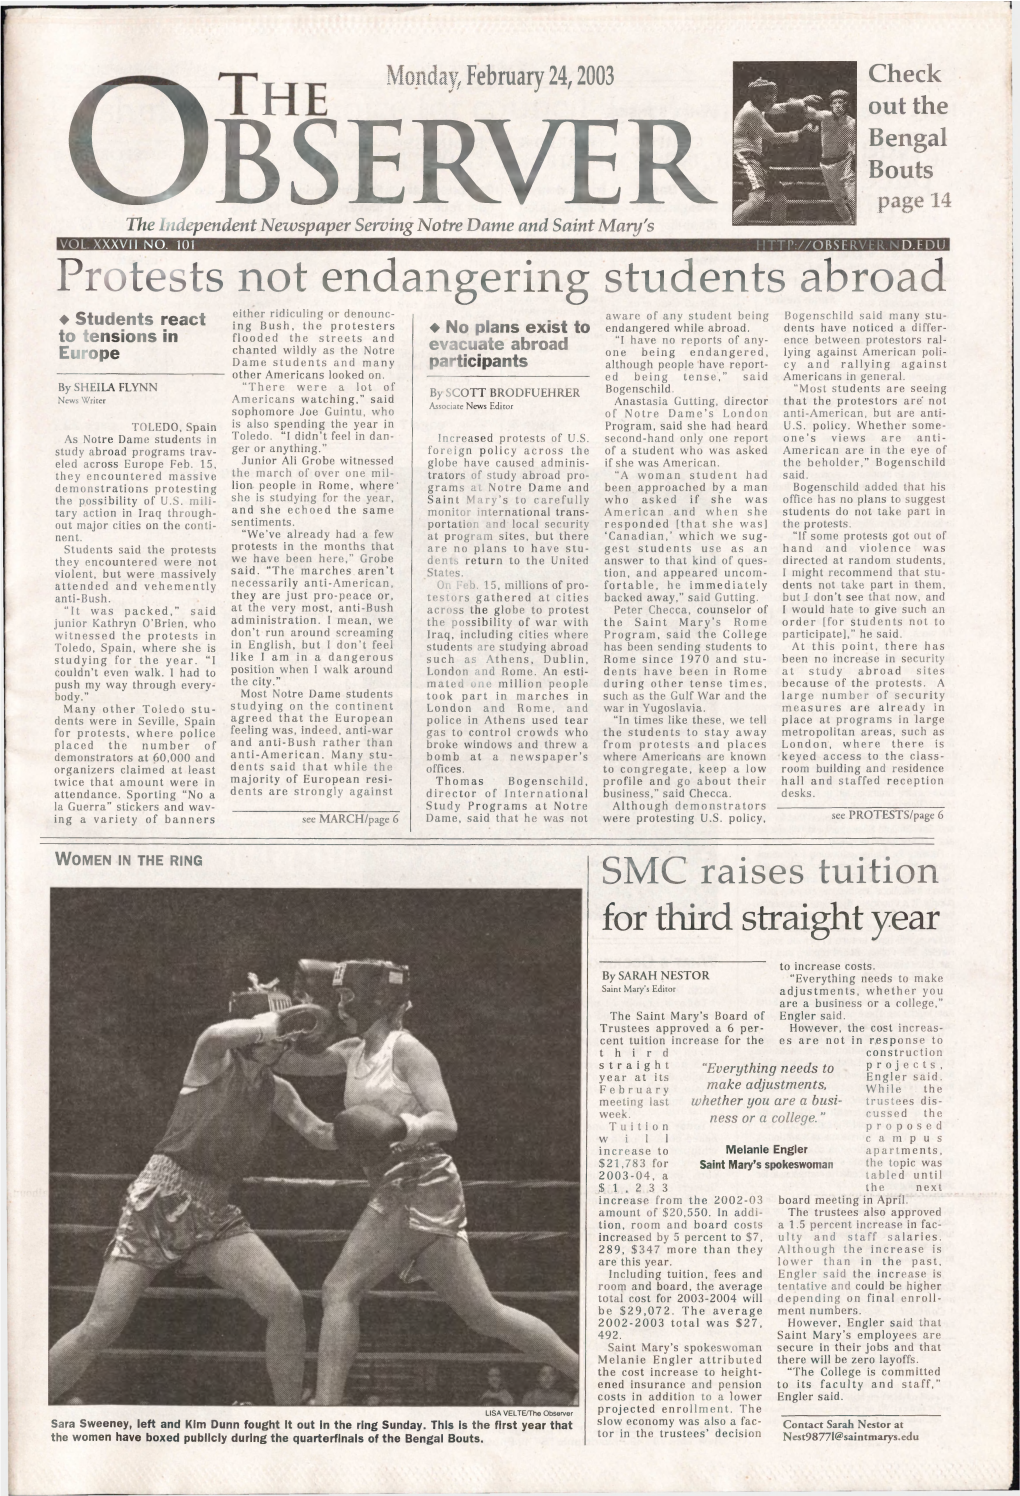 Protests Not Endangering Students Abroad